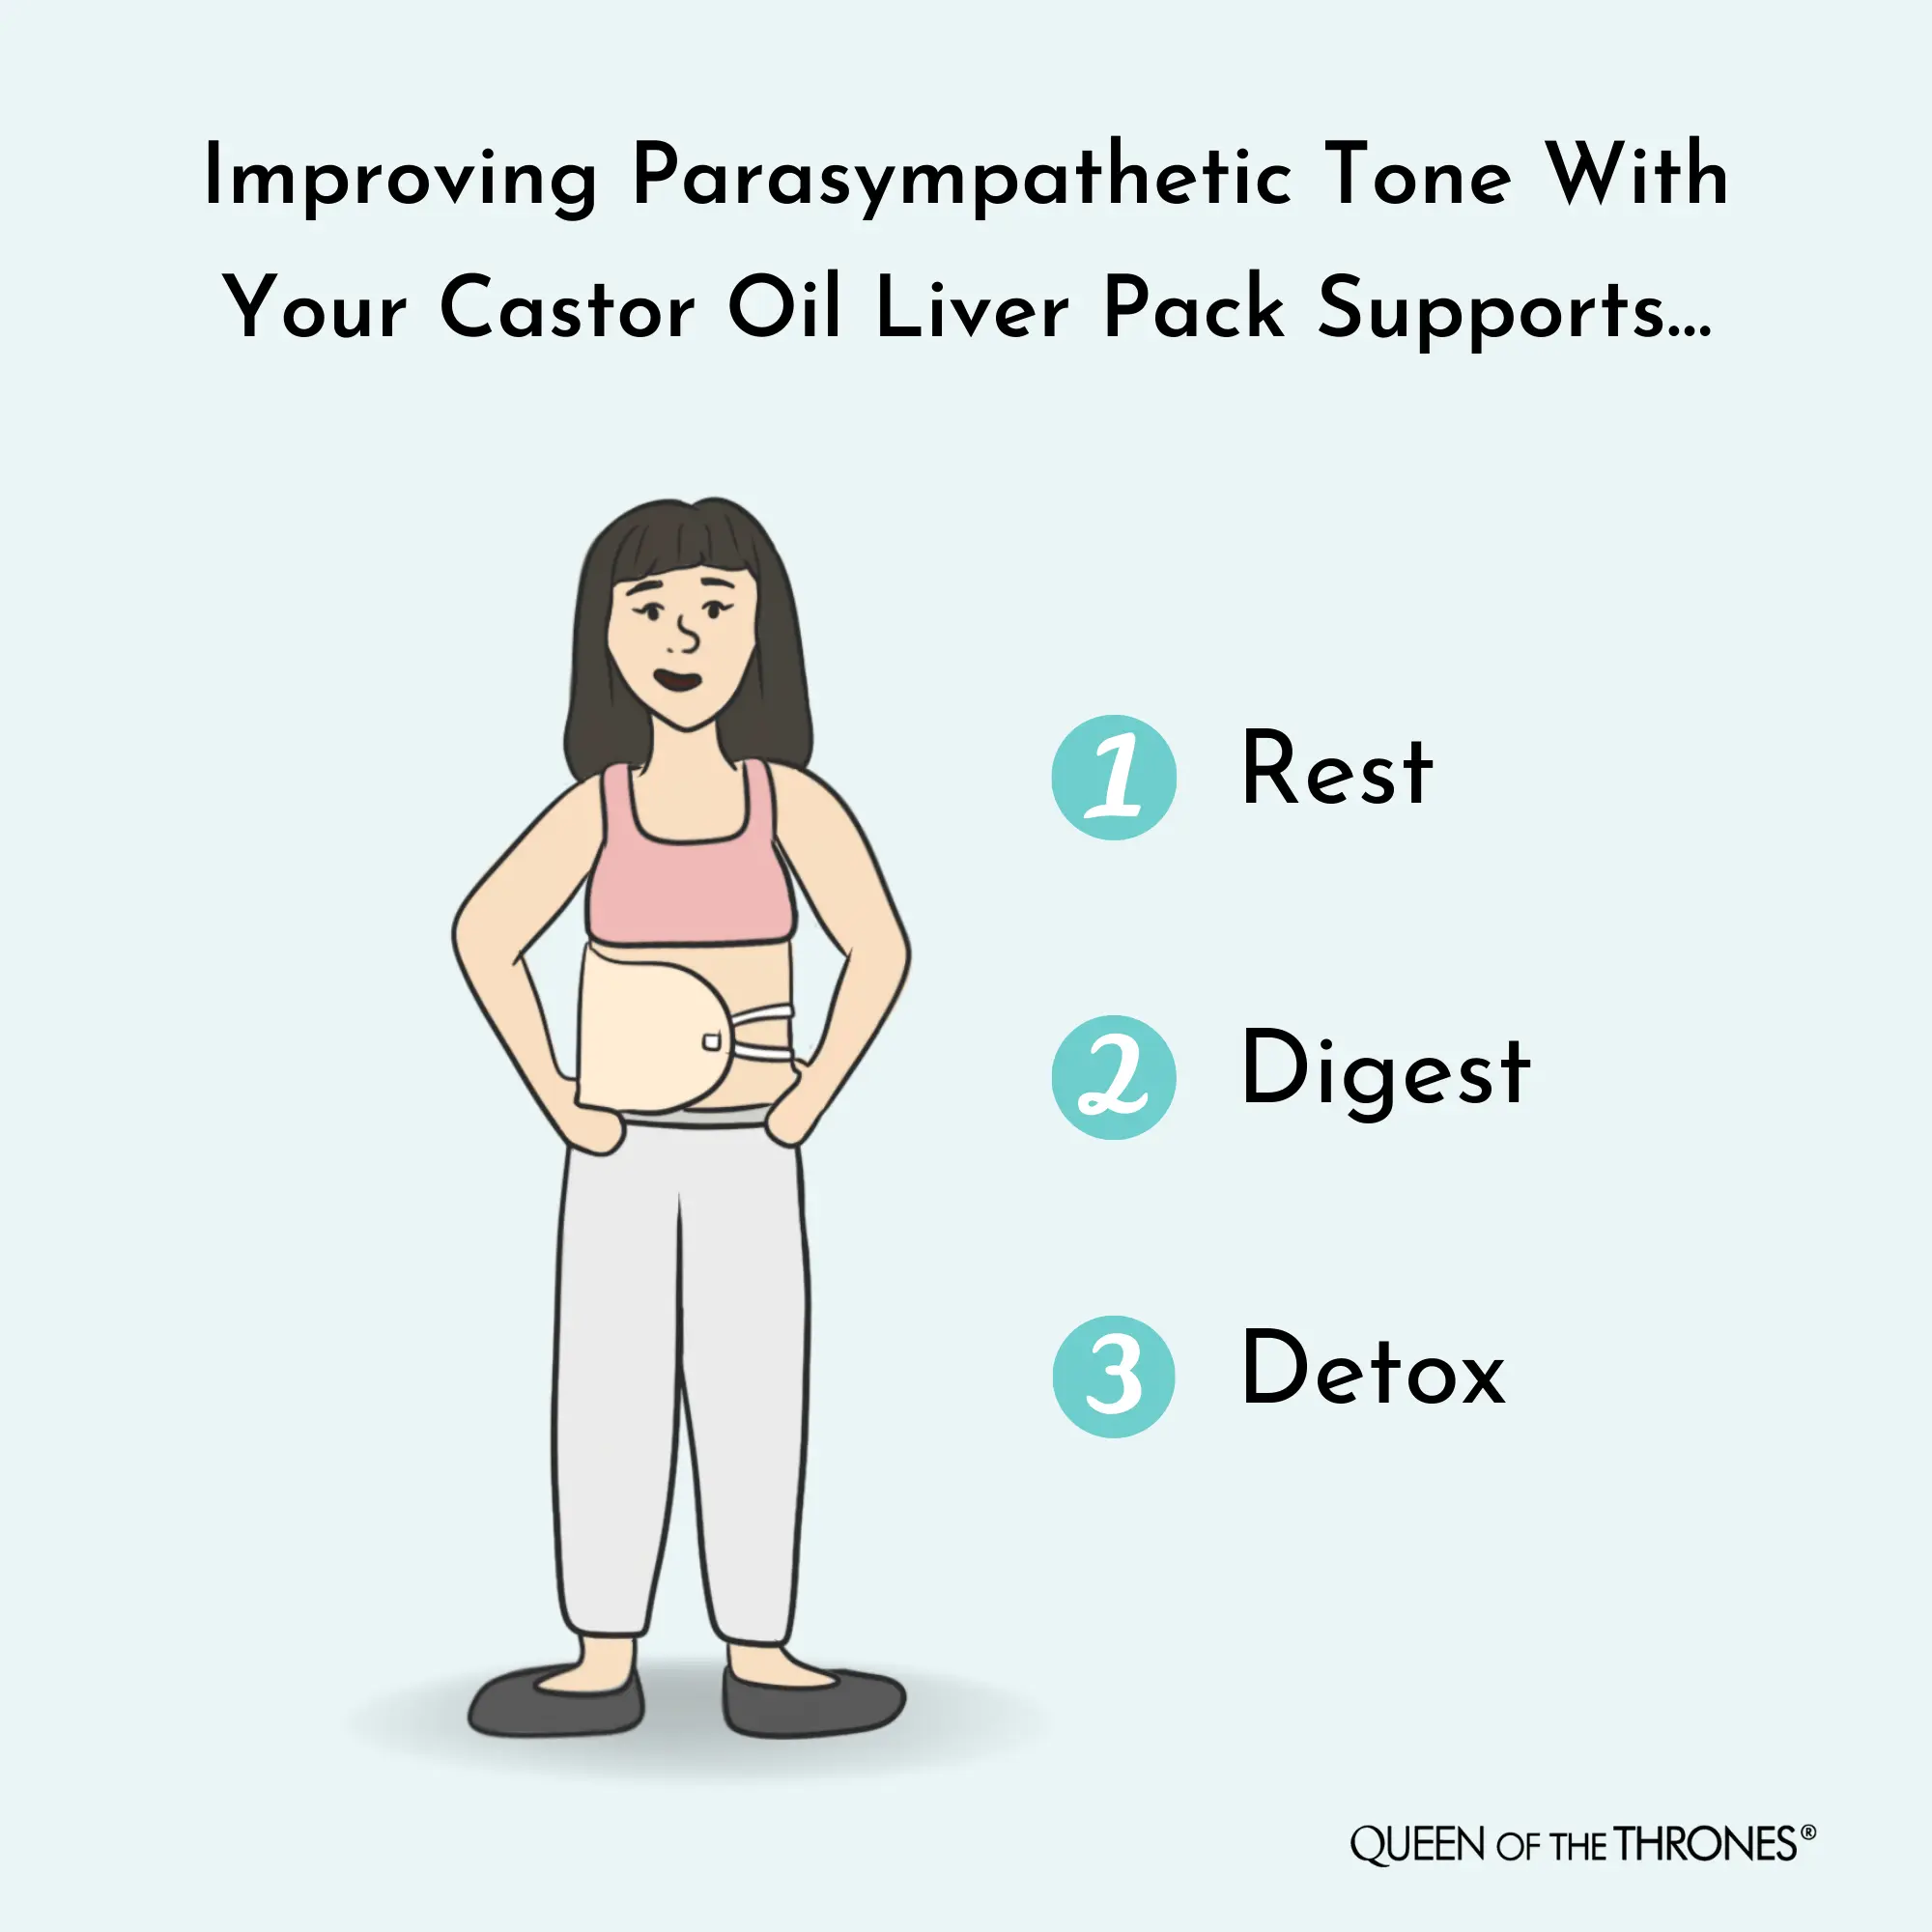 Improve Parasympathetic Tone with Queen of the Thrones Castor Oil Packs